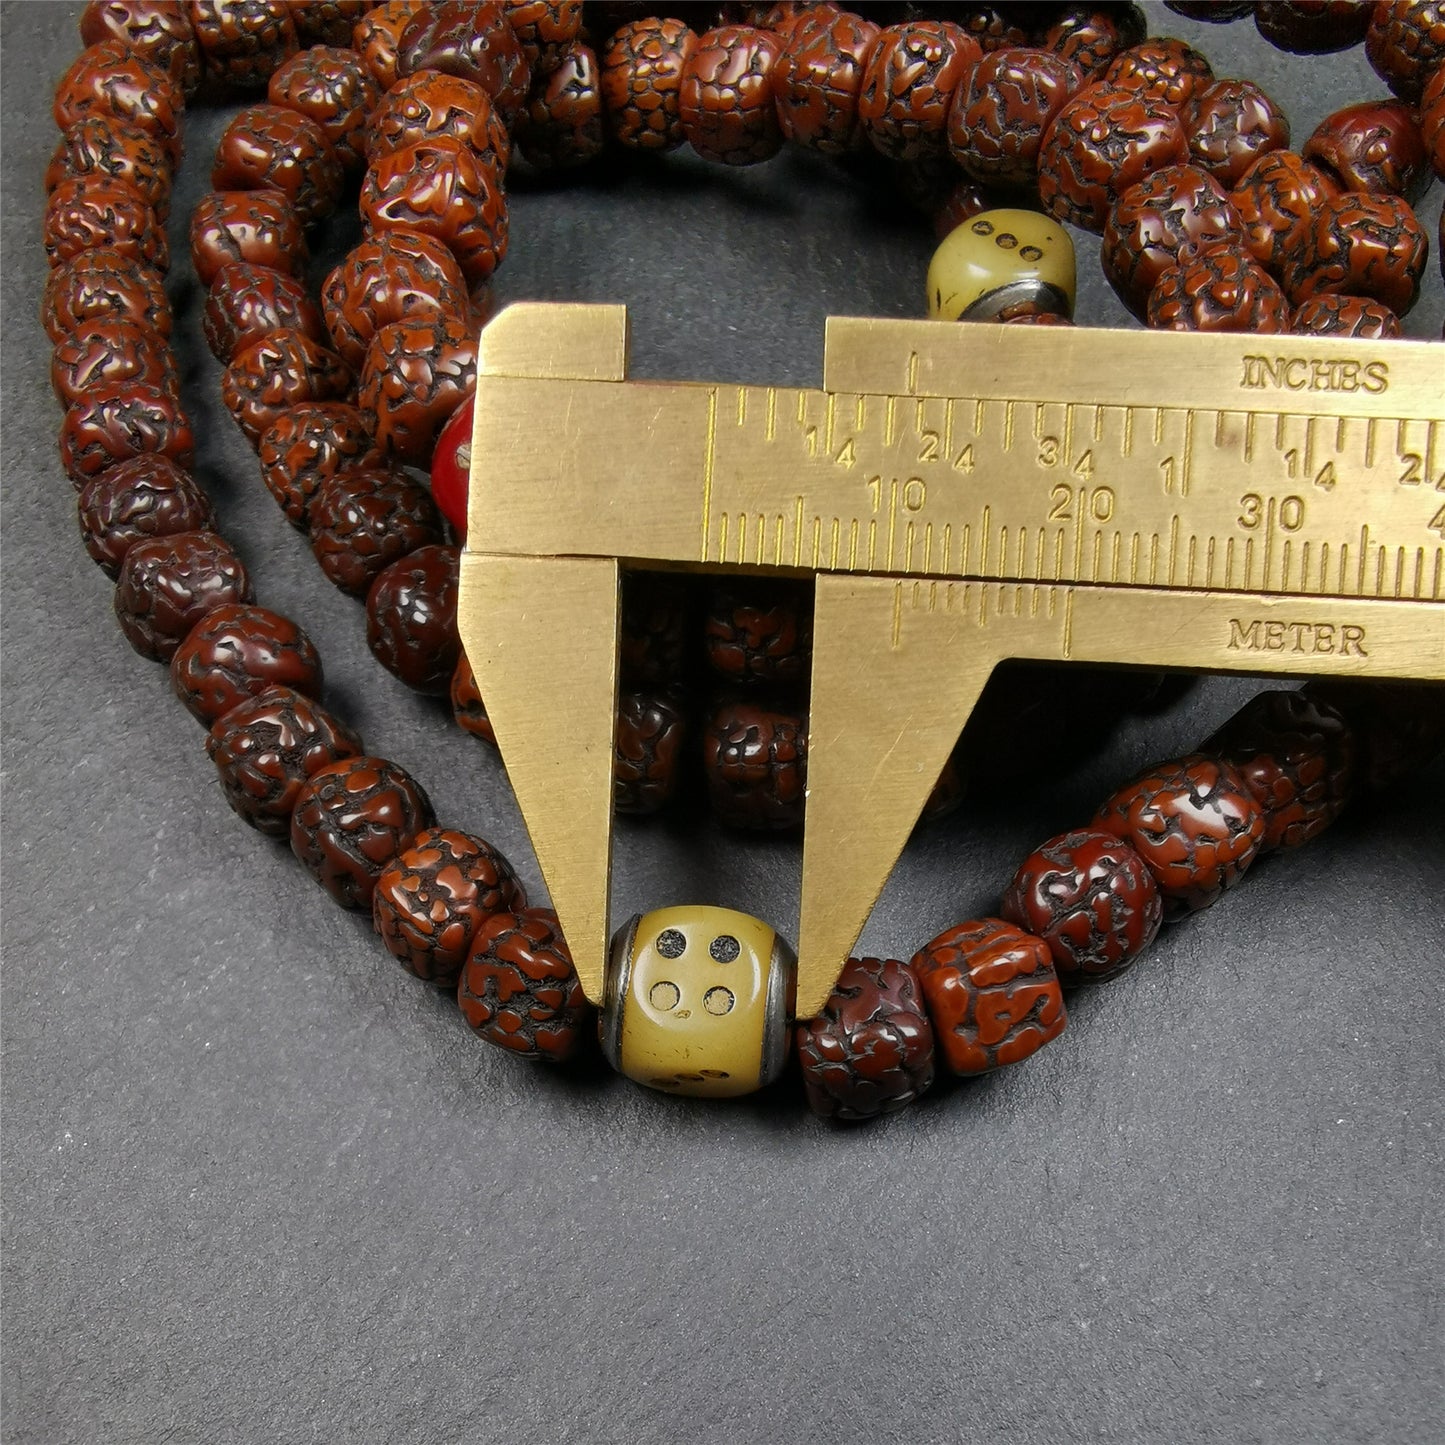 This old mala was handmade from tibetan crafts man in Baiyu County,blessed in Baiyu monastery. It's composed of 108 pcs 9mm rudraksha beads,with 3 carved dice beads,bead diameter is 0.35 inch and circumference is 35 inches.